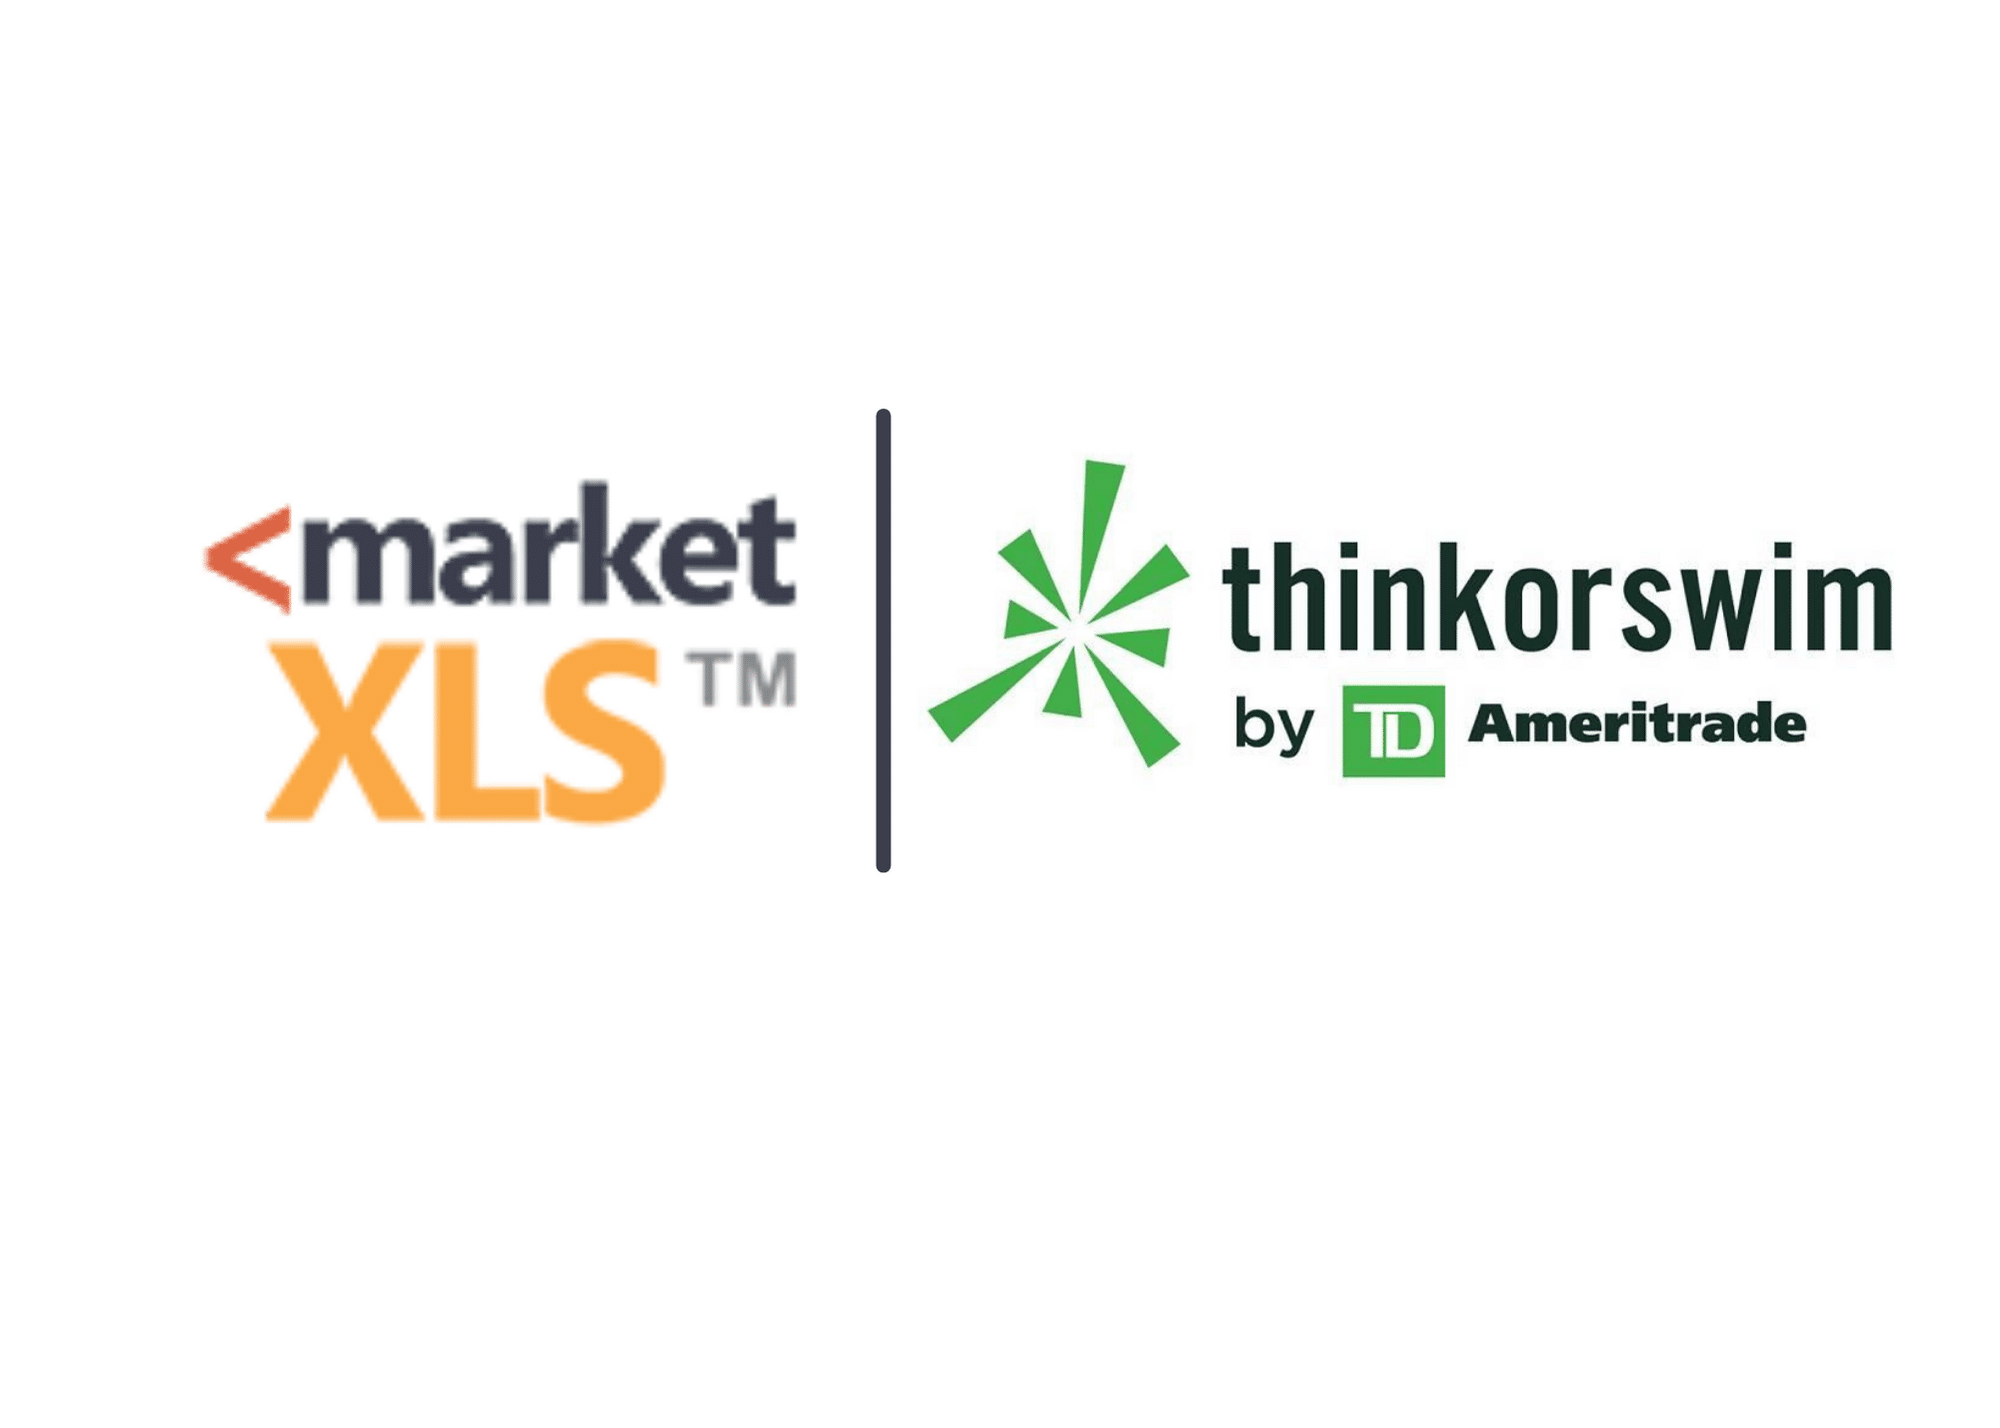 “Exploring Exercise Options Strategies with TD Ameritrade” - MarketXLS